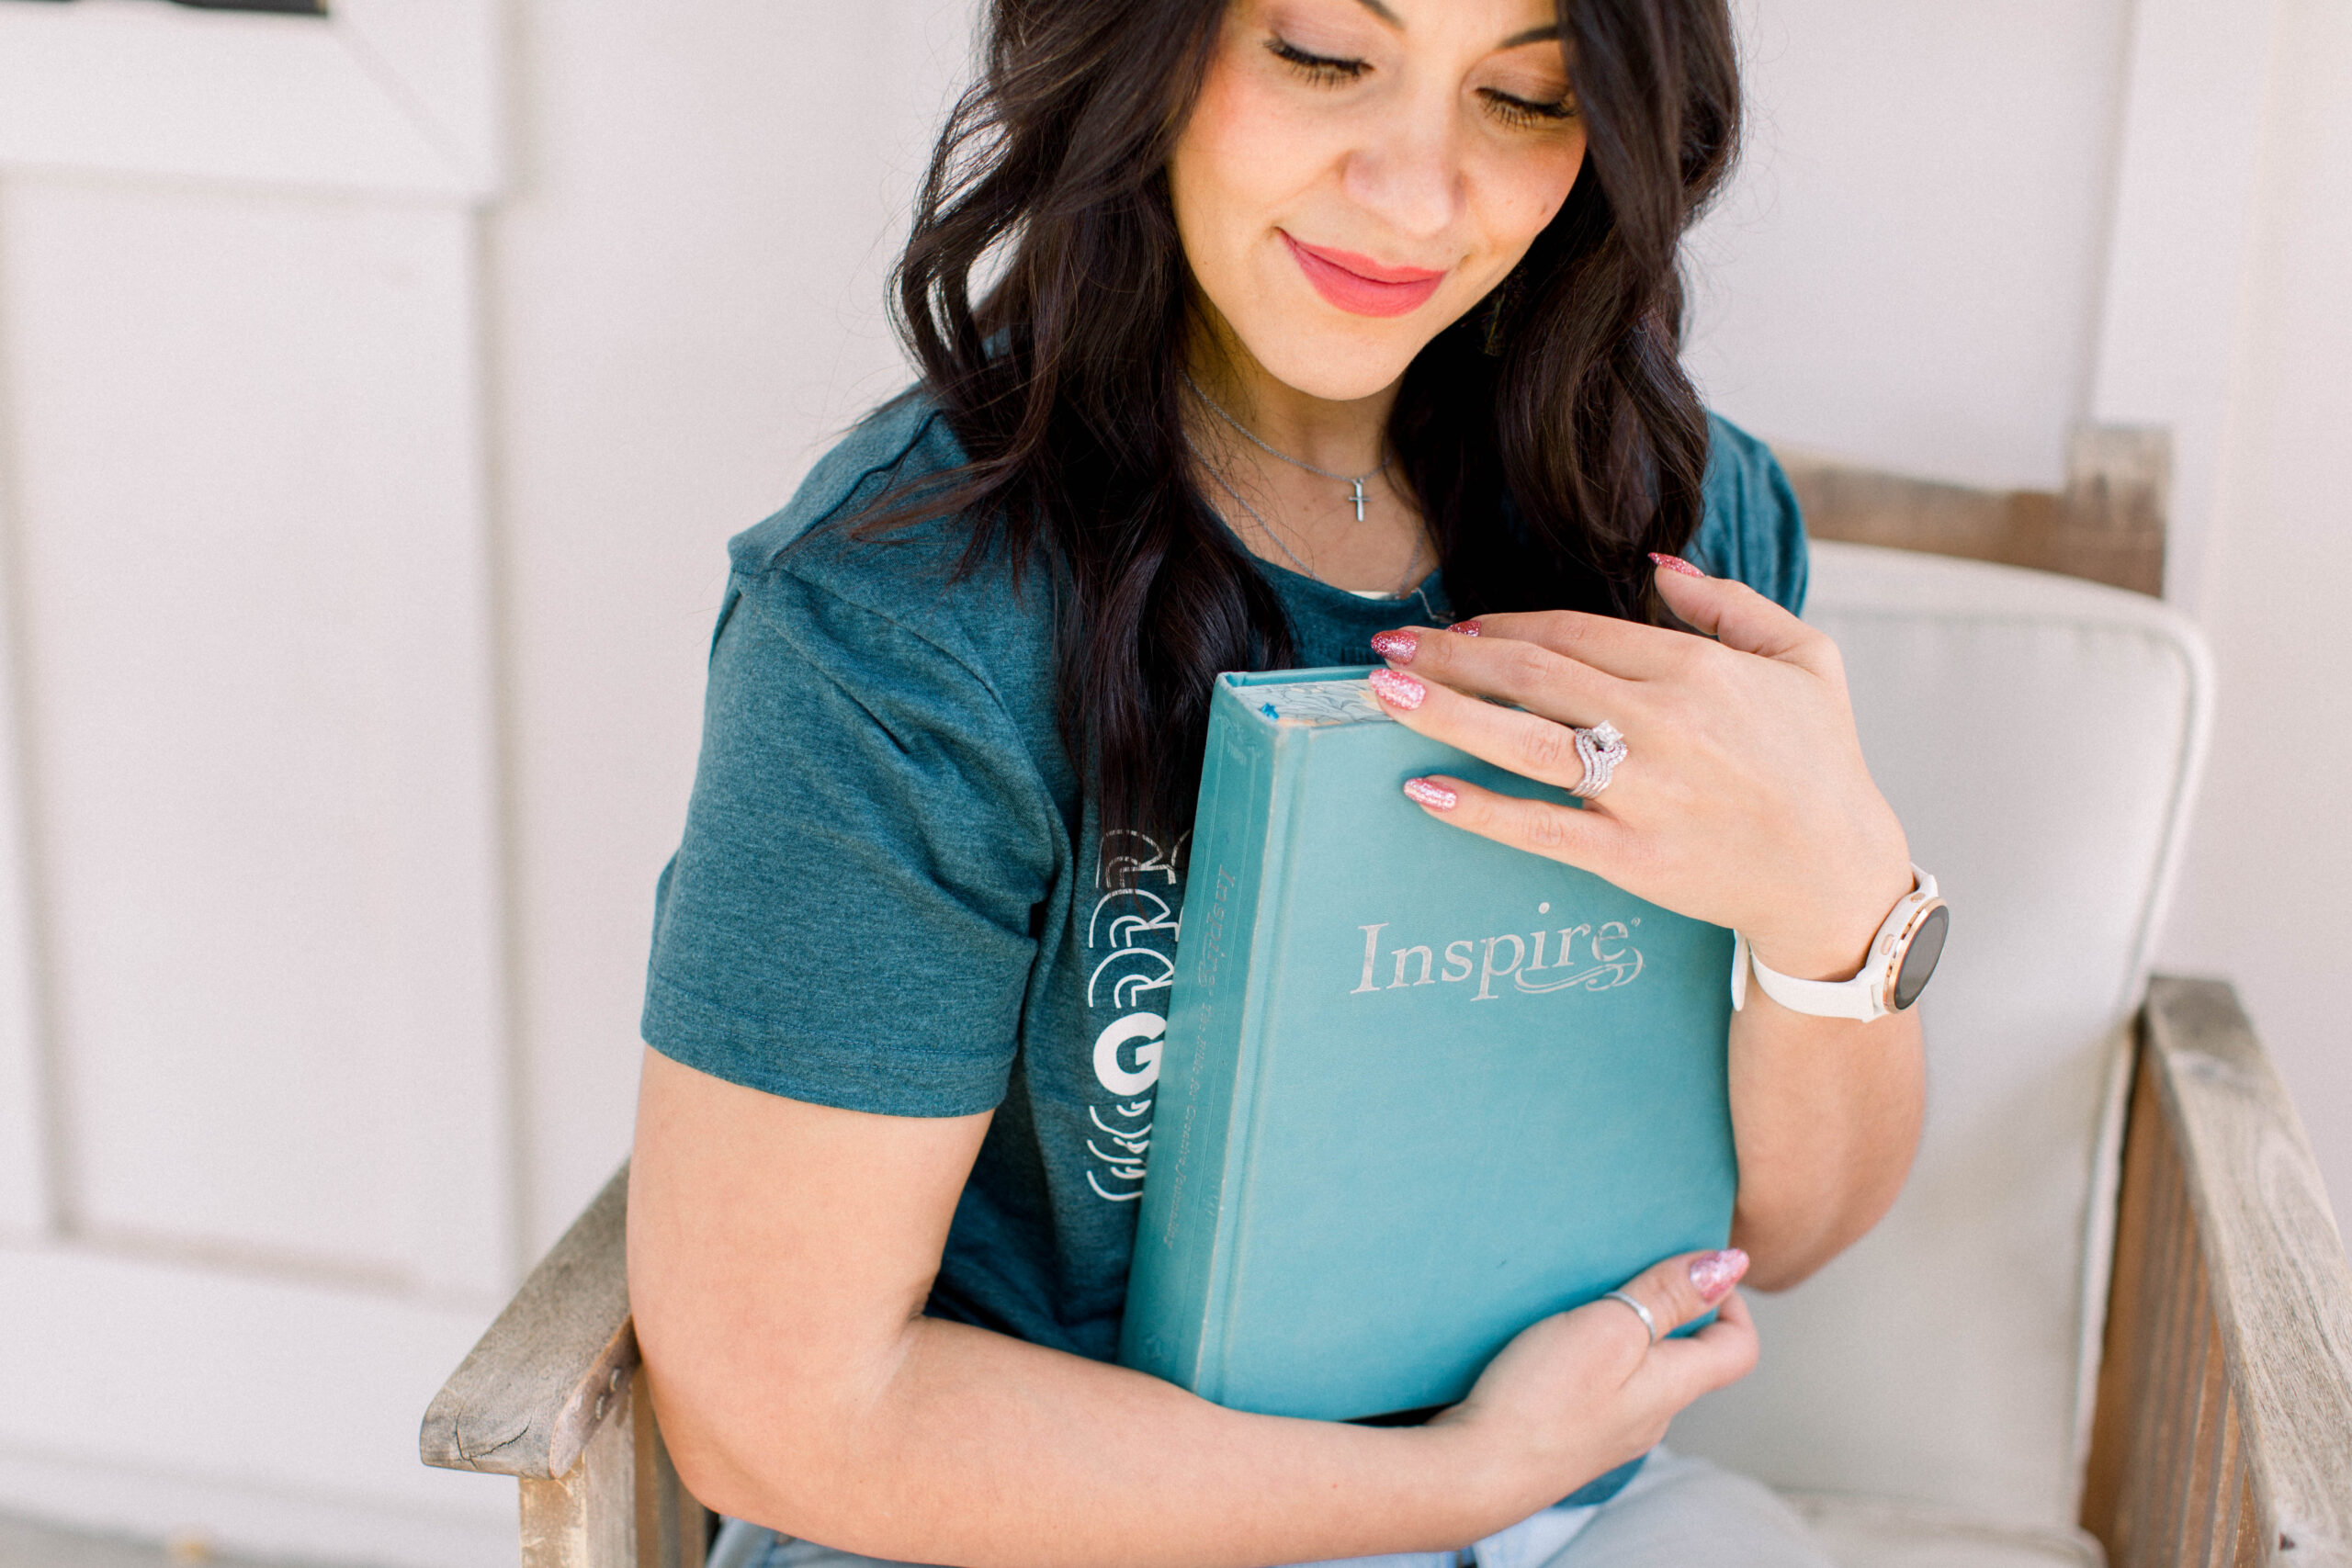 Dark haired woman in green t-shirt is sitting in a chair. She is looking down and holding a Bible.